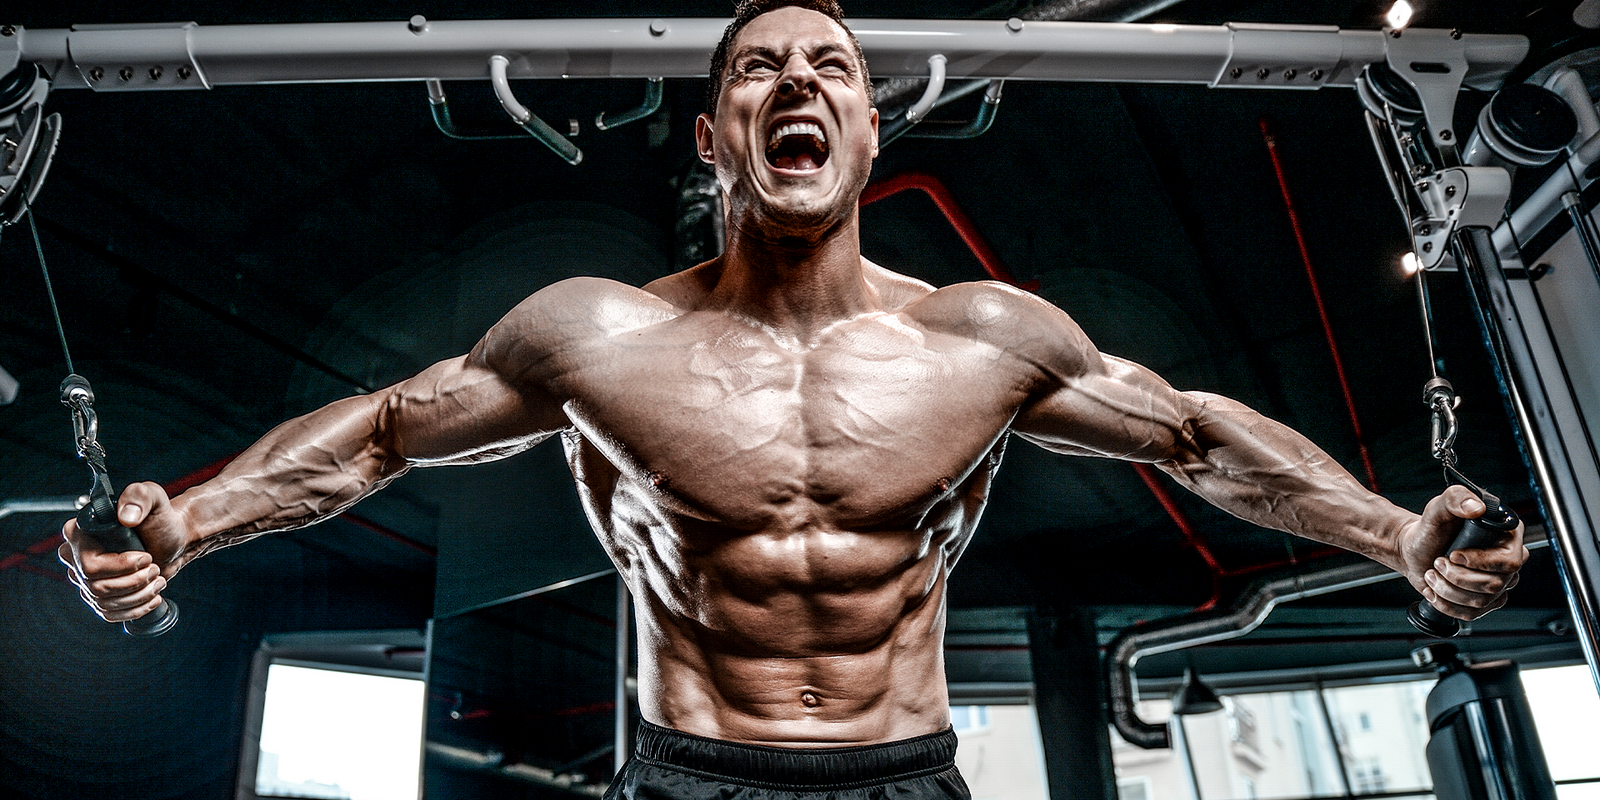 Clenbuterol vs Clenbutrol: What is the difference?